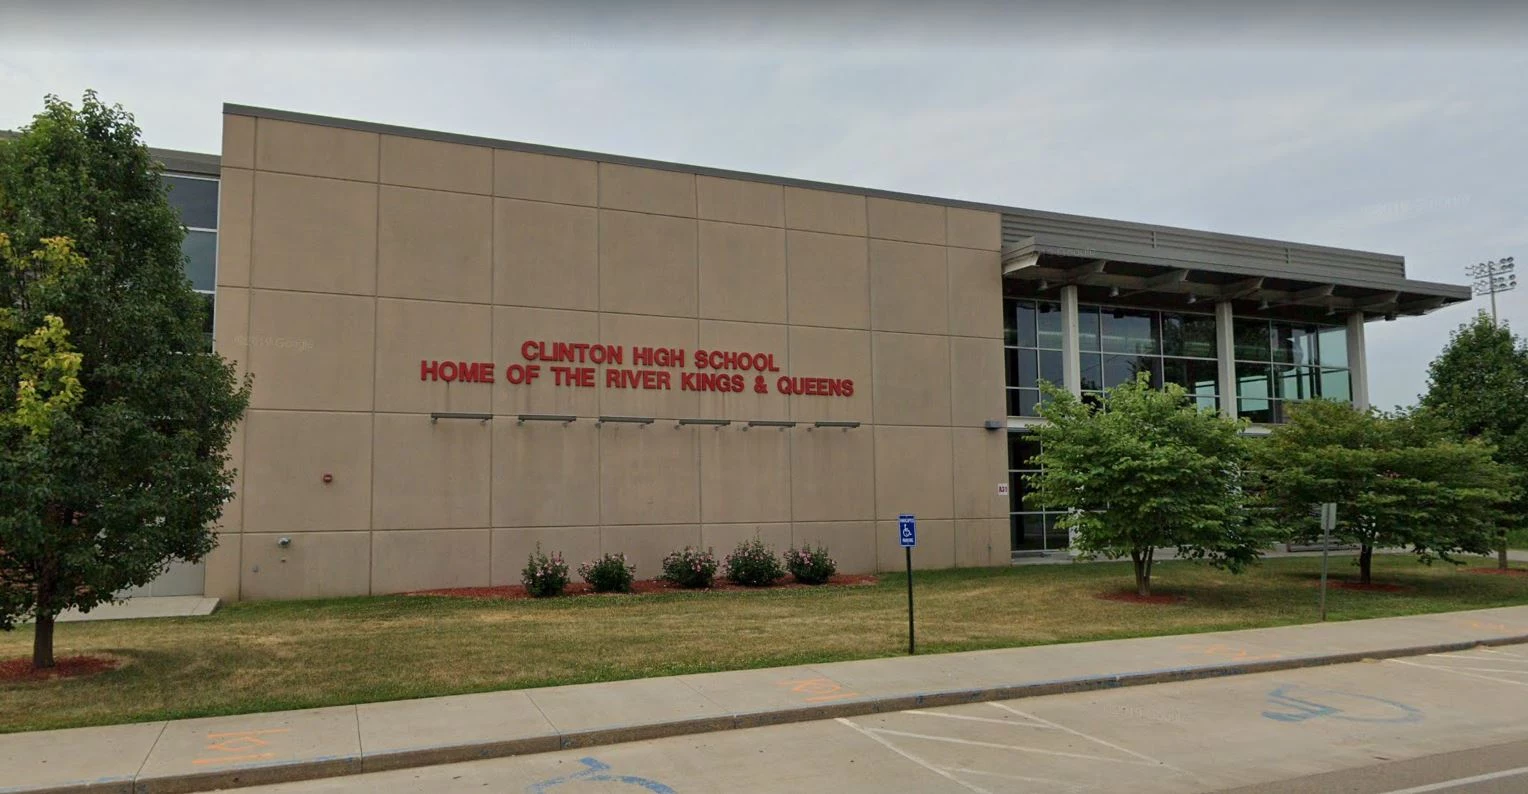 clinton township school district, new jersey